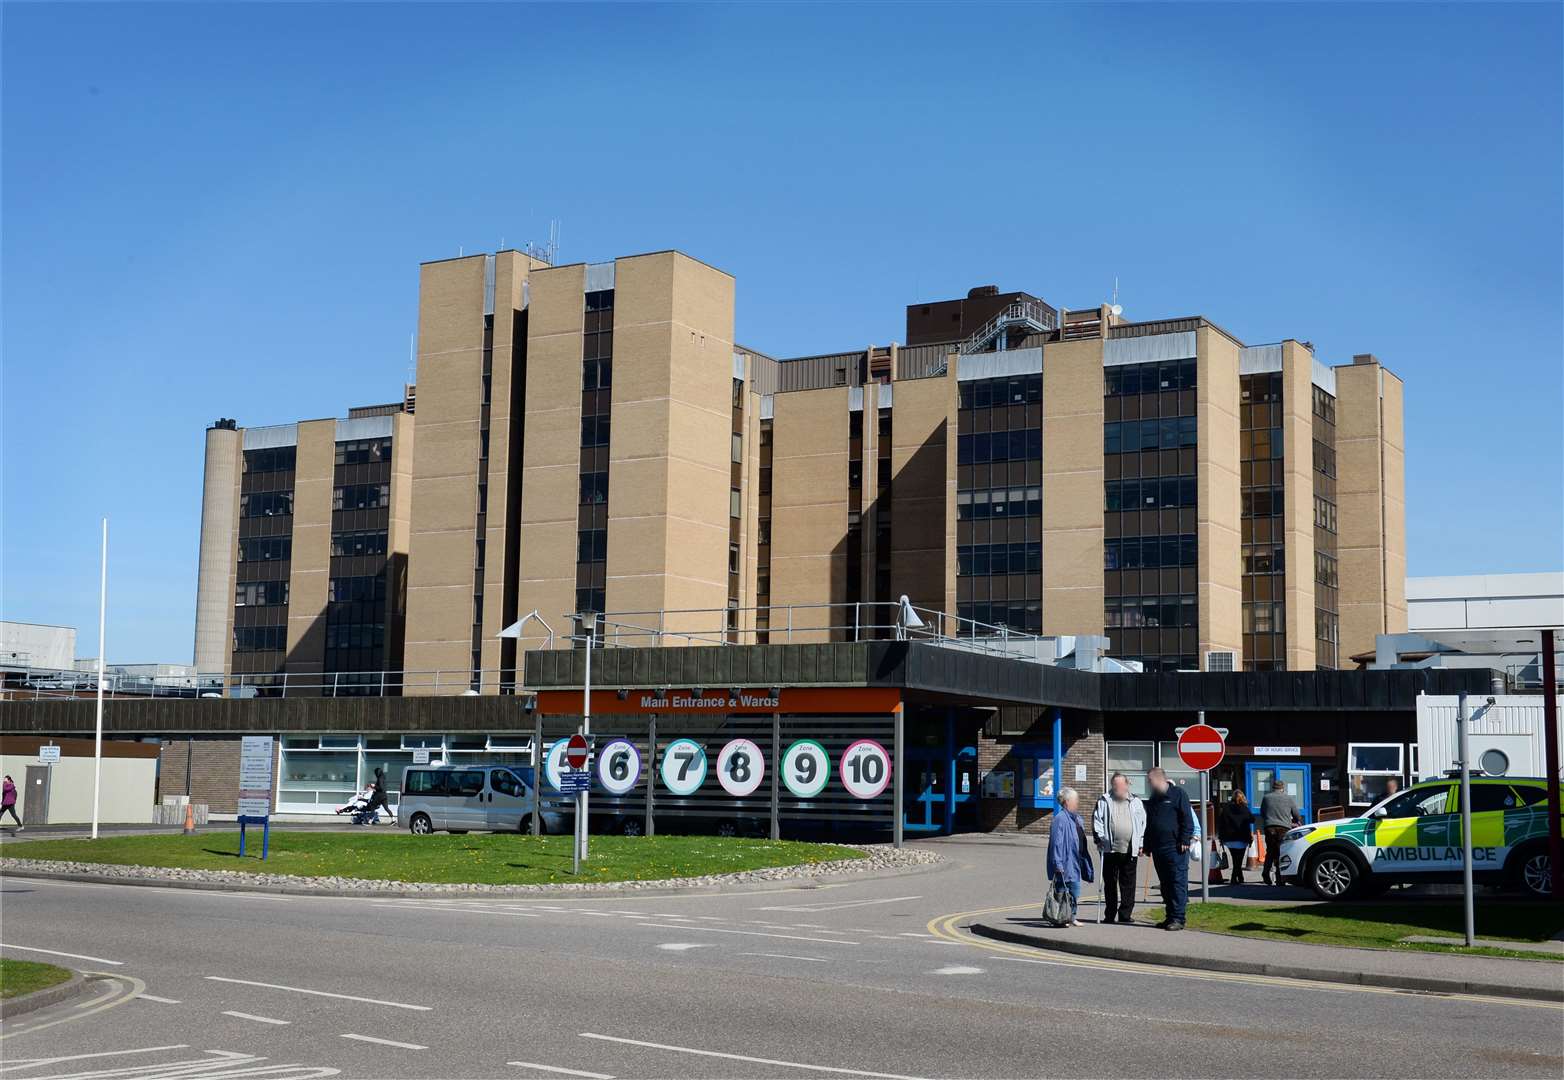 The number of intensive care beds at Raigmore Hospital has been increased, with the possibility for further growth.